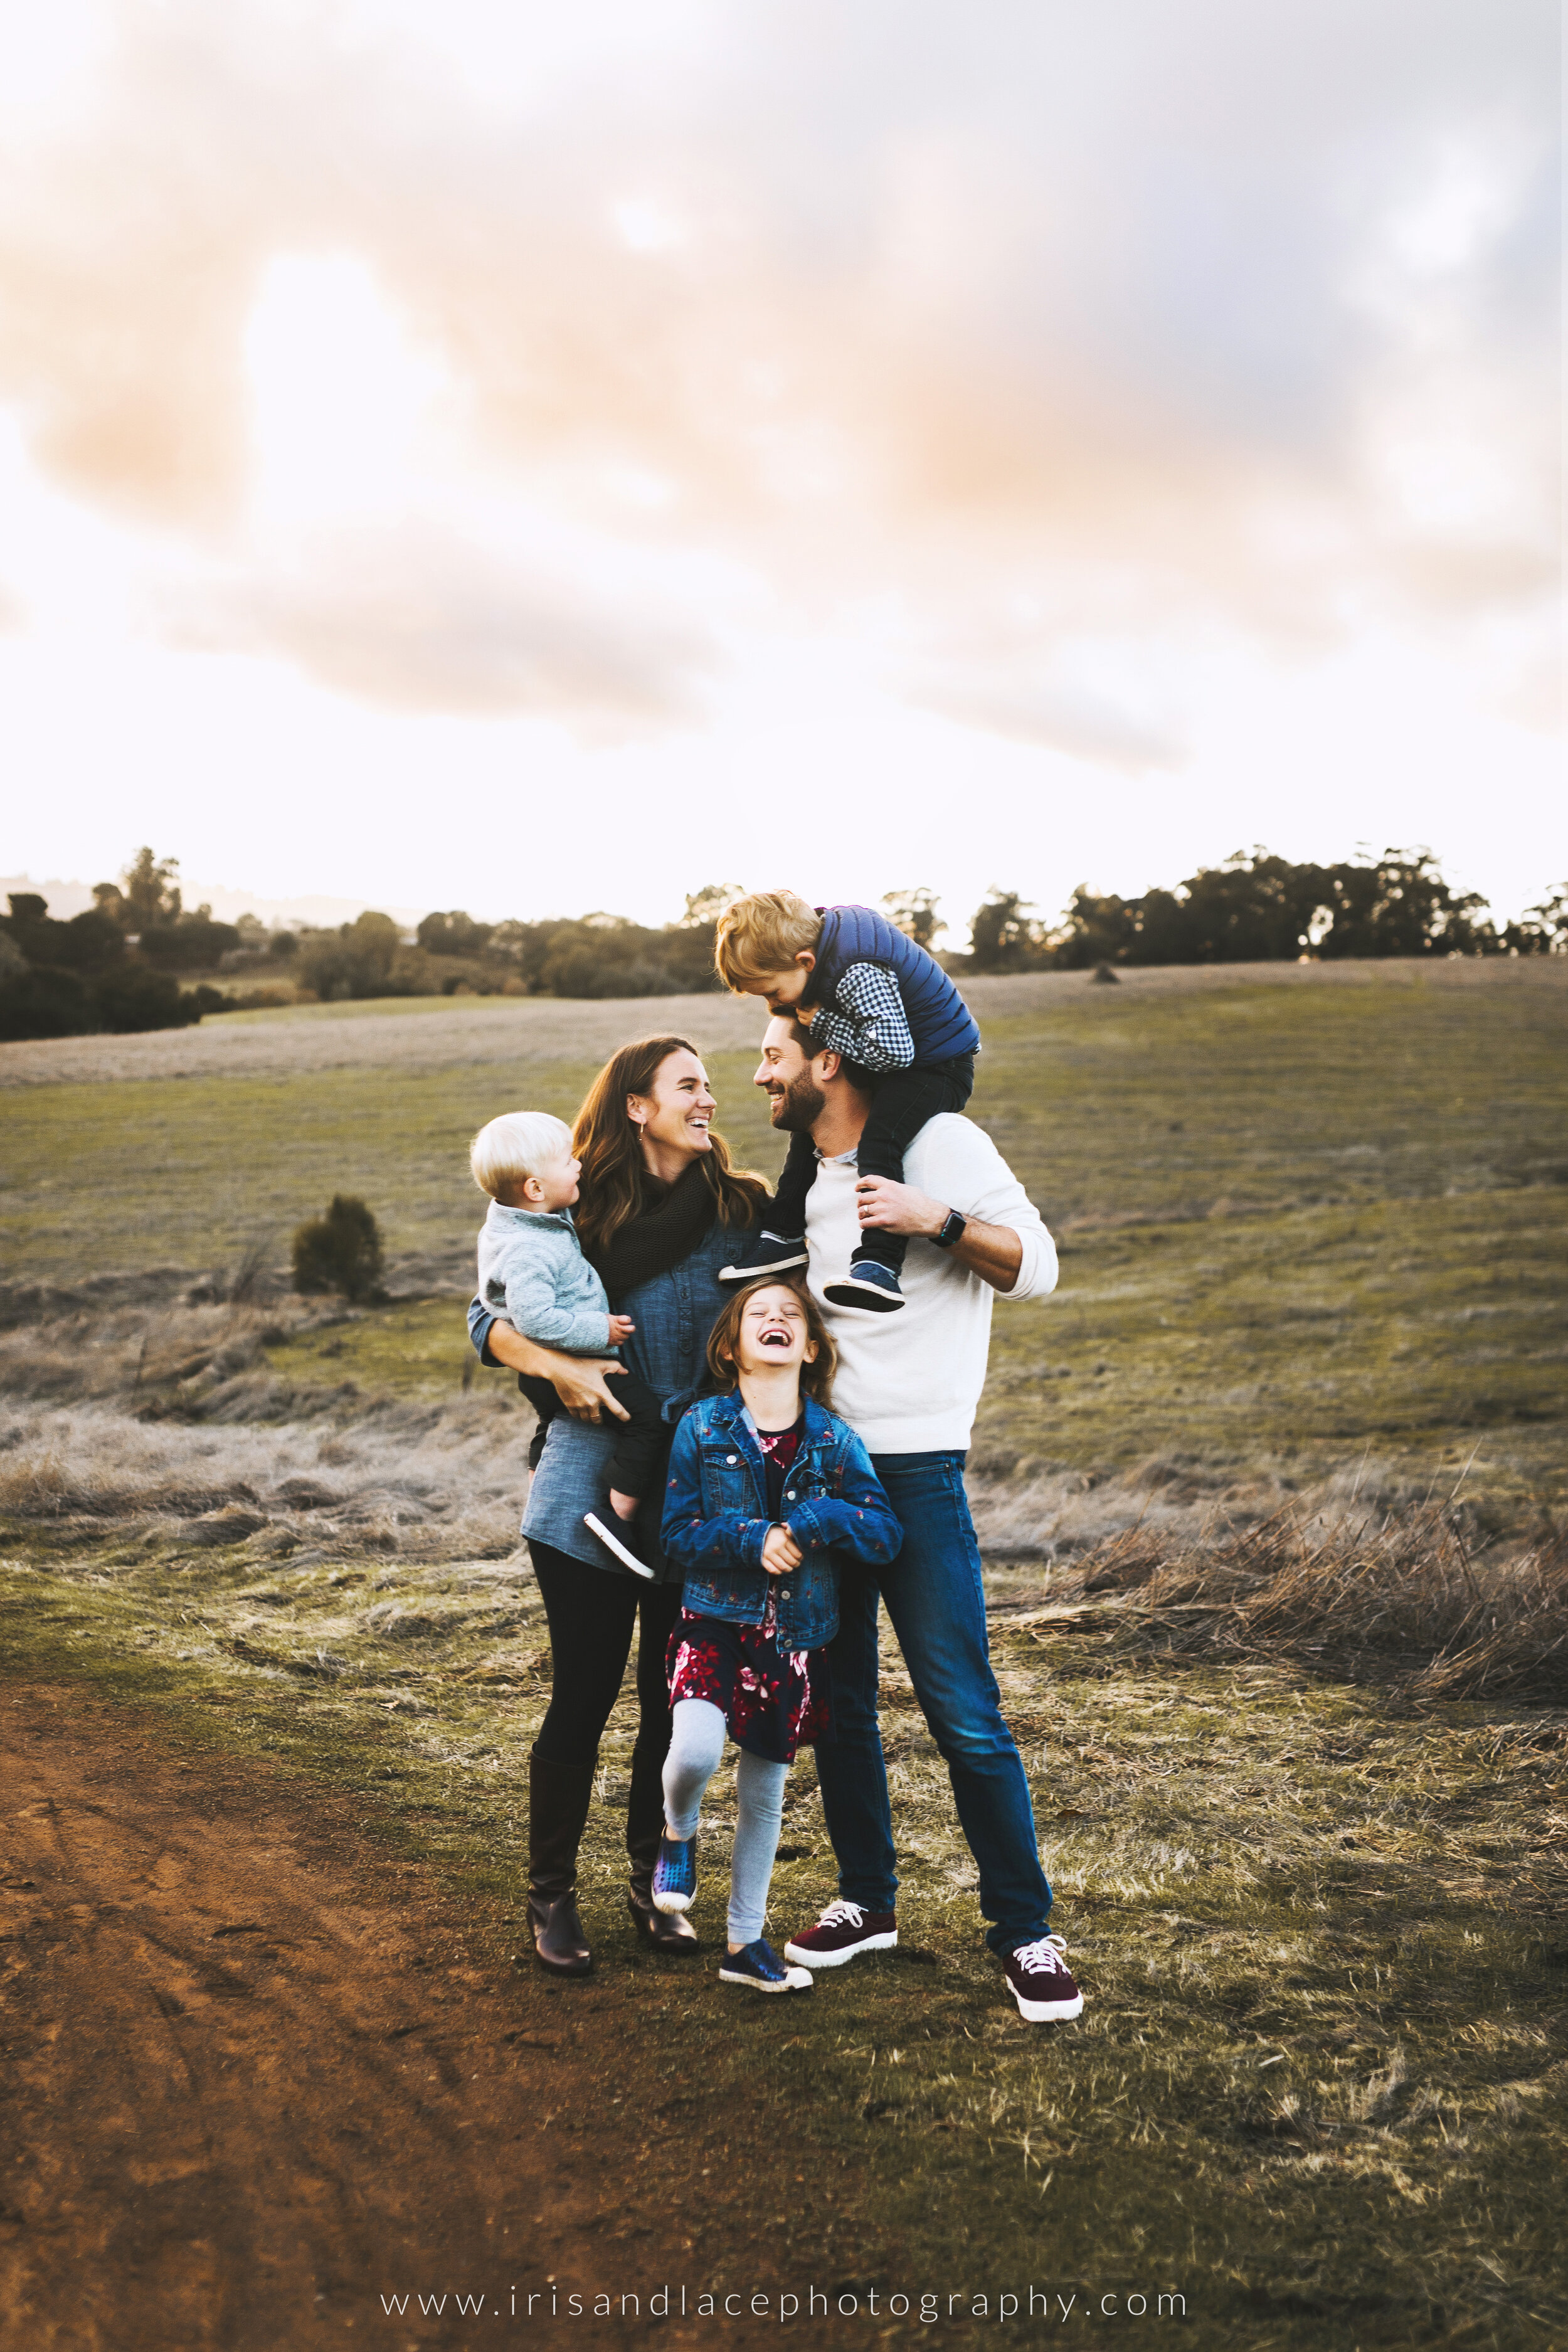 SF Bay Area Family Photos  |  Iris and Lace Photography